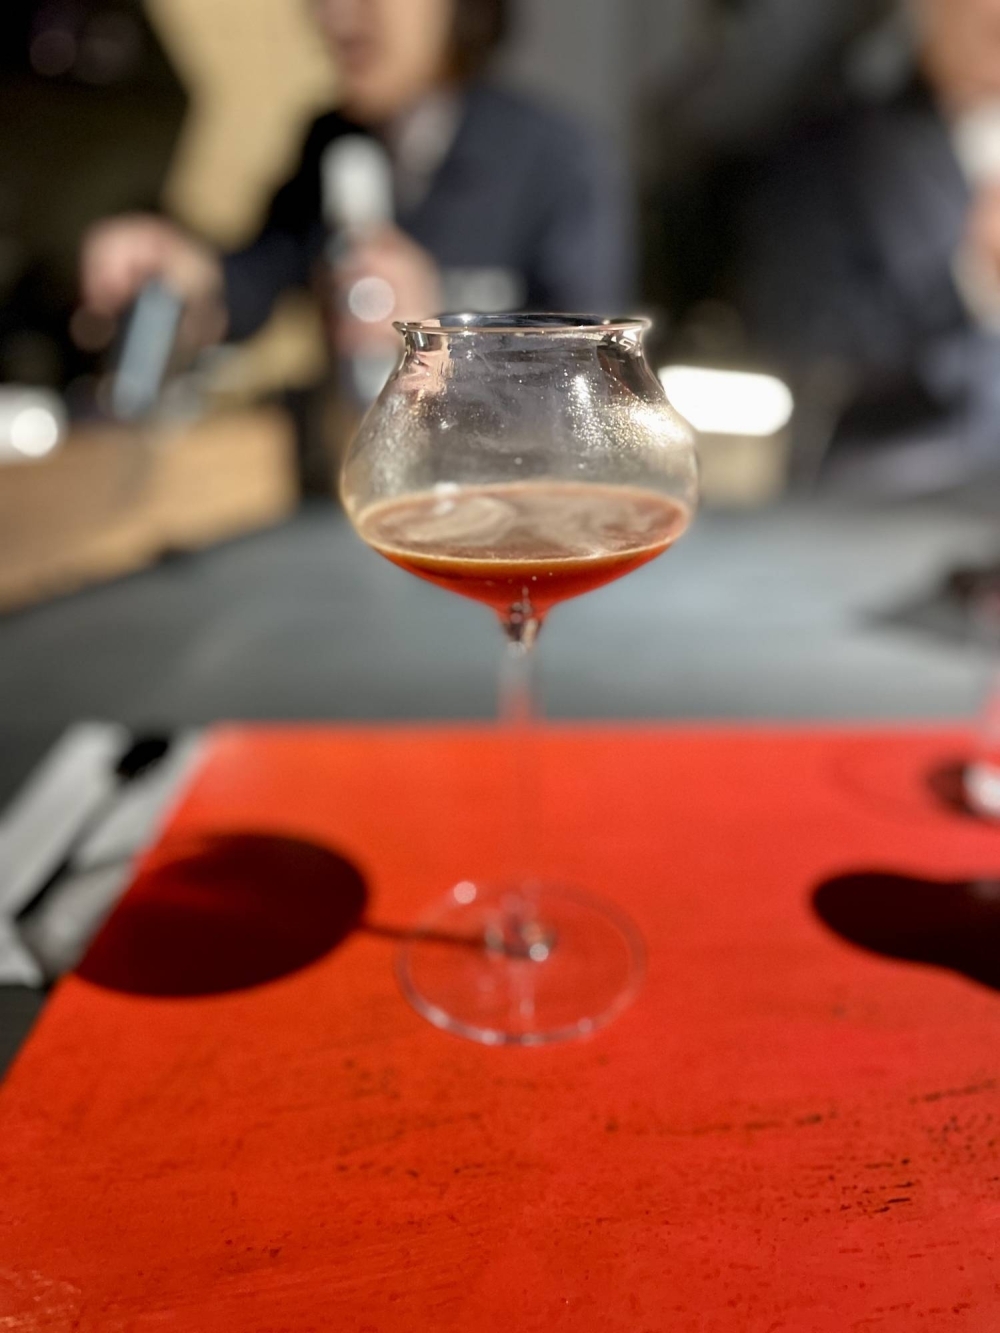 The last course is an espresso-based mocktail made with pomegranate concentrate, hibiscus cold brew and fermented white peach.